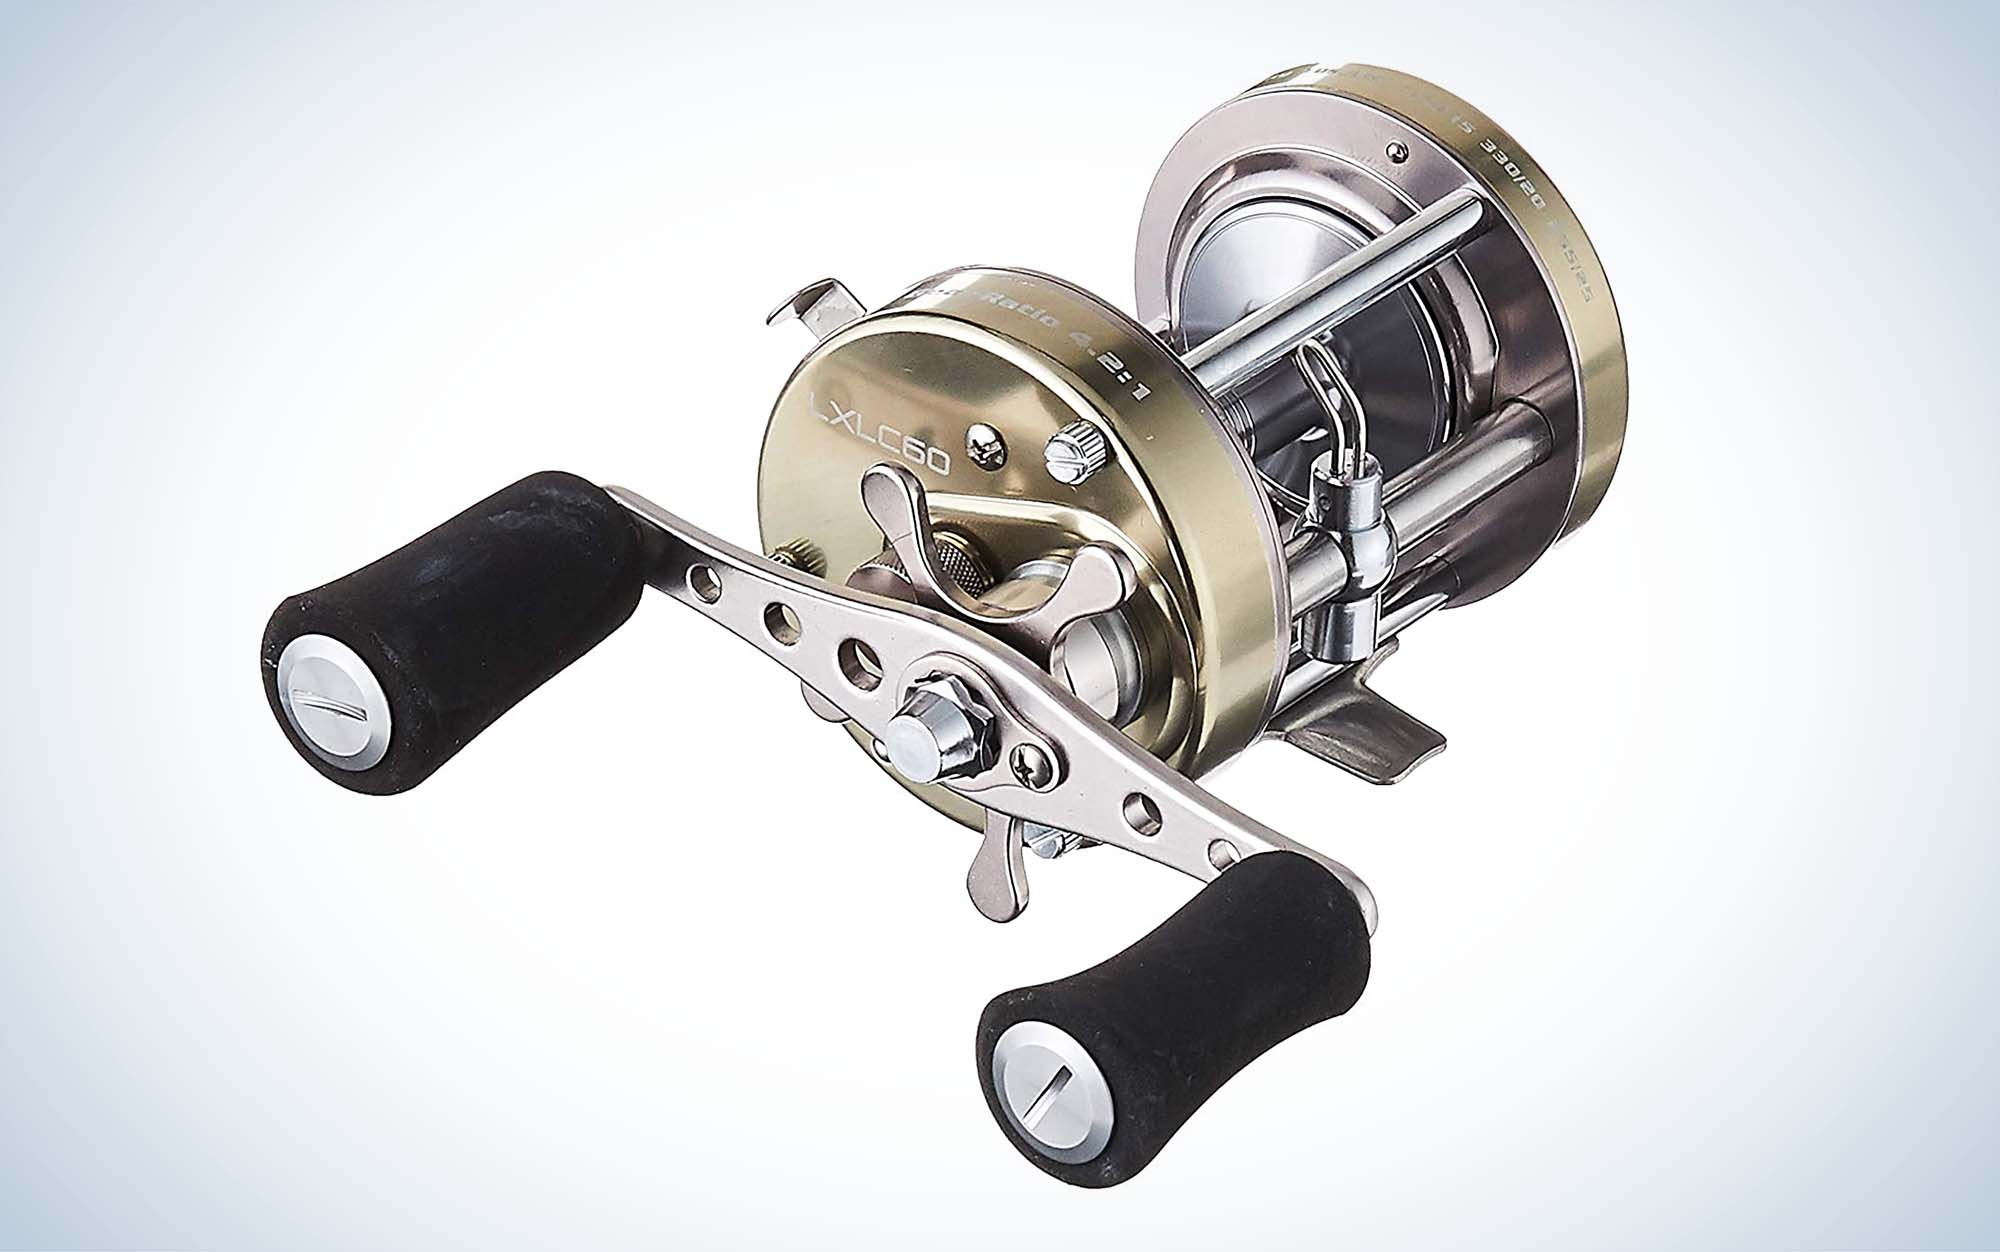 Round Reels Vs. Low Profile Reels For Fishing Swimbaits! Which Is